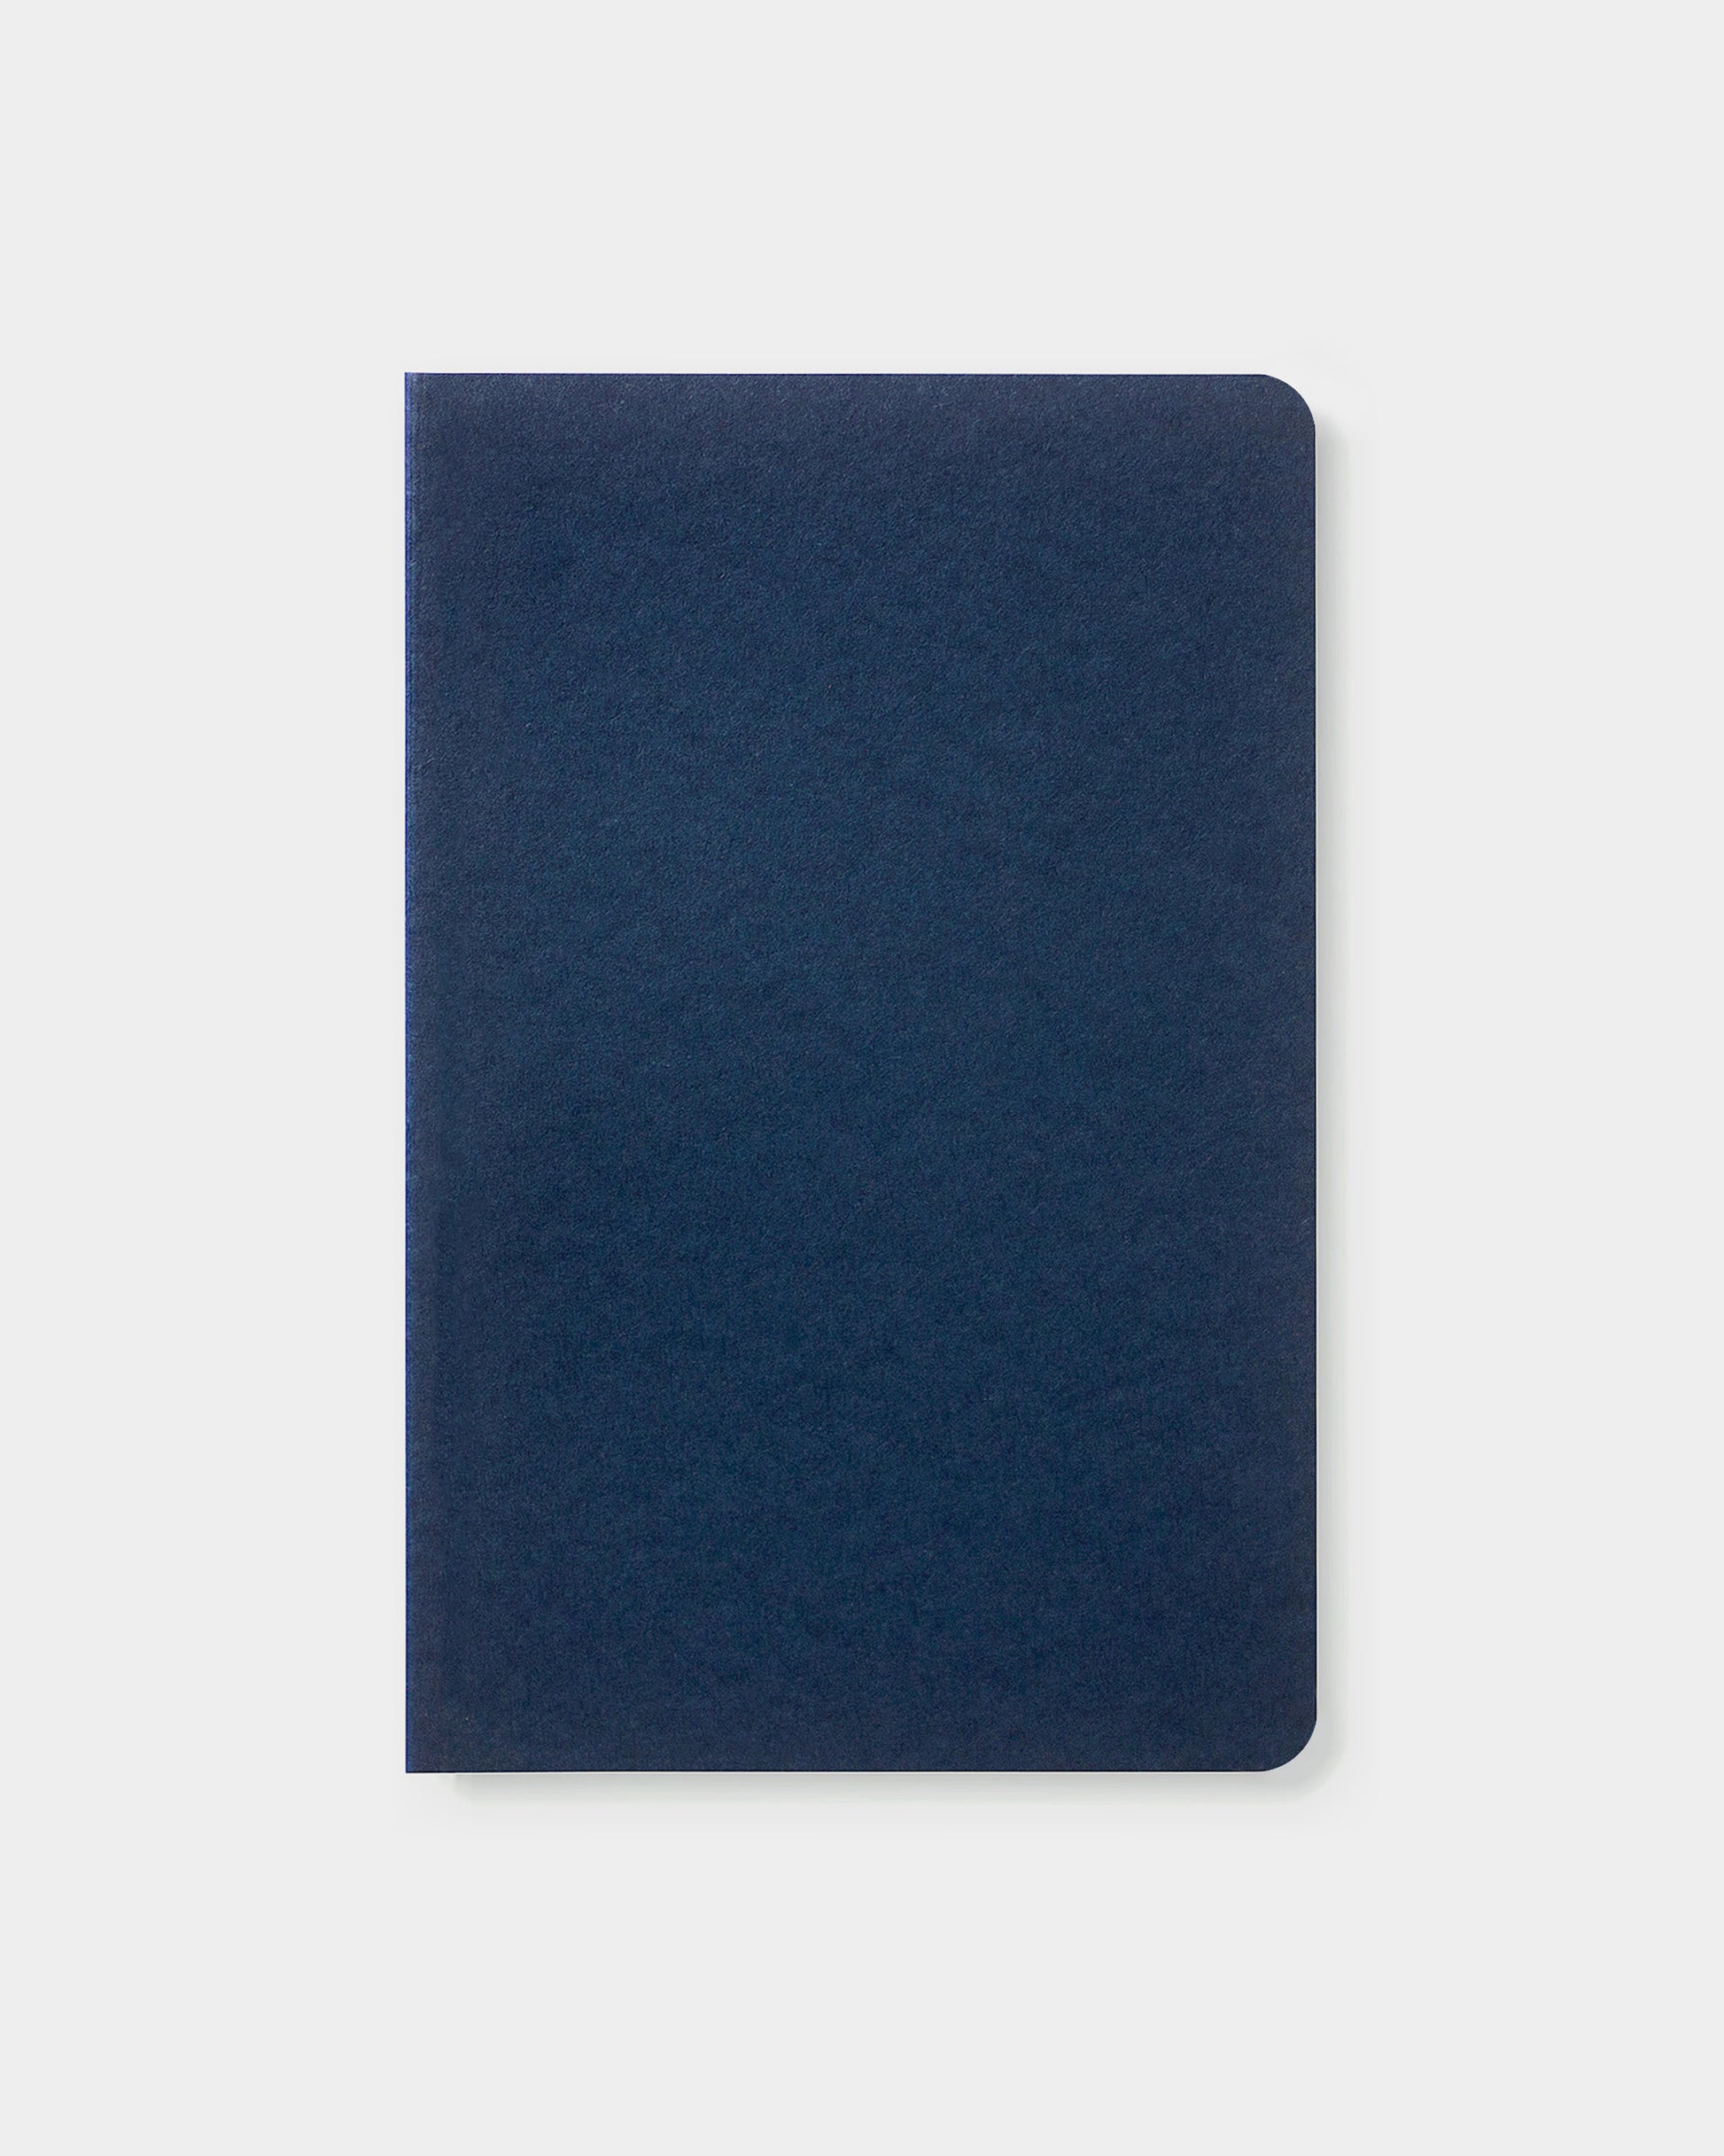 4.25 x 6.5" standard notebook, made with eco-friendly papers. Lined pages, navy color way.